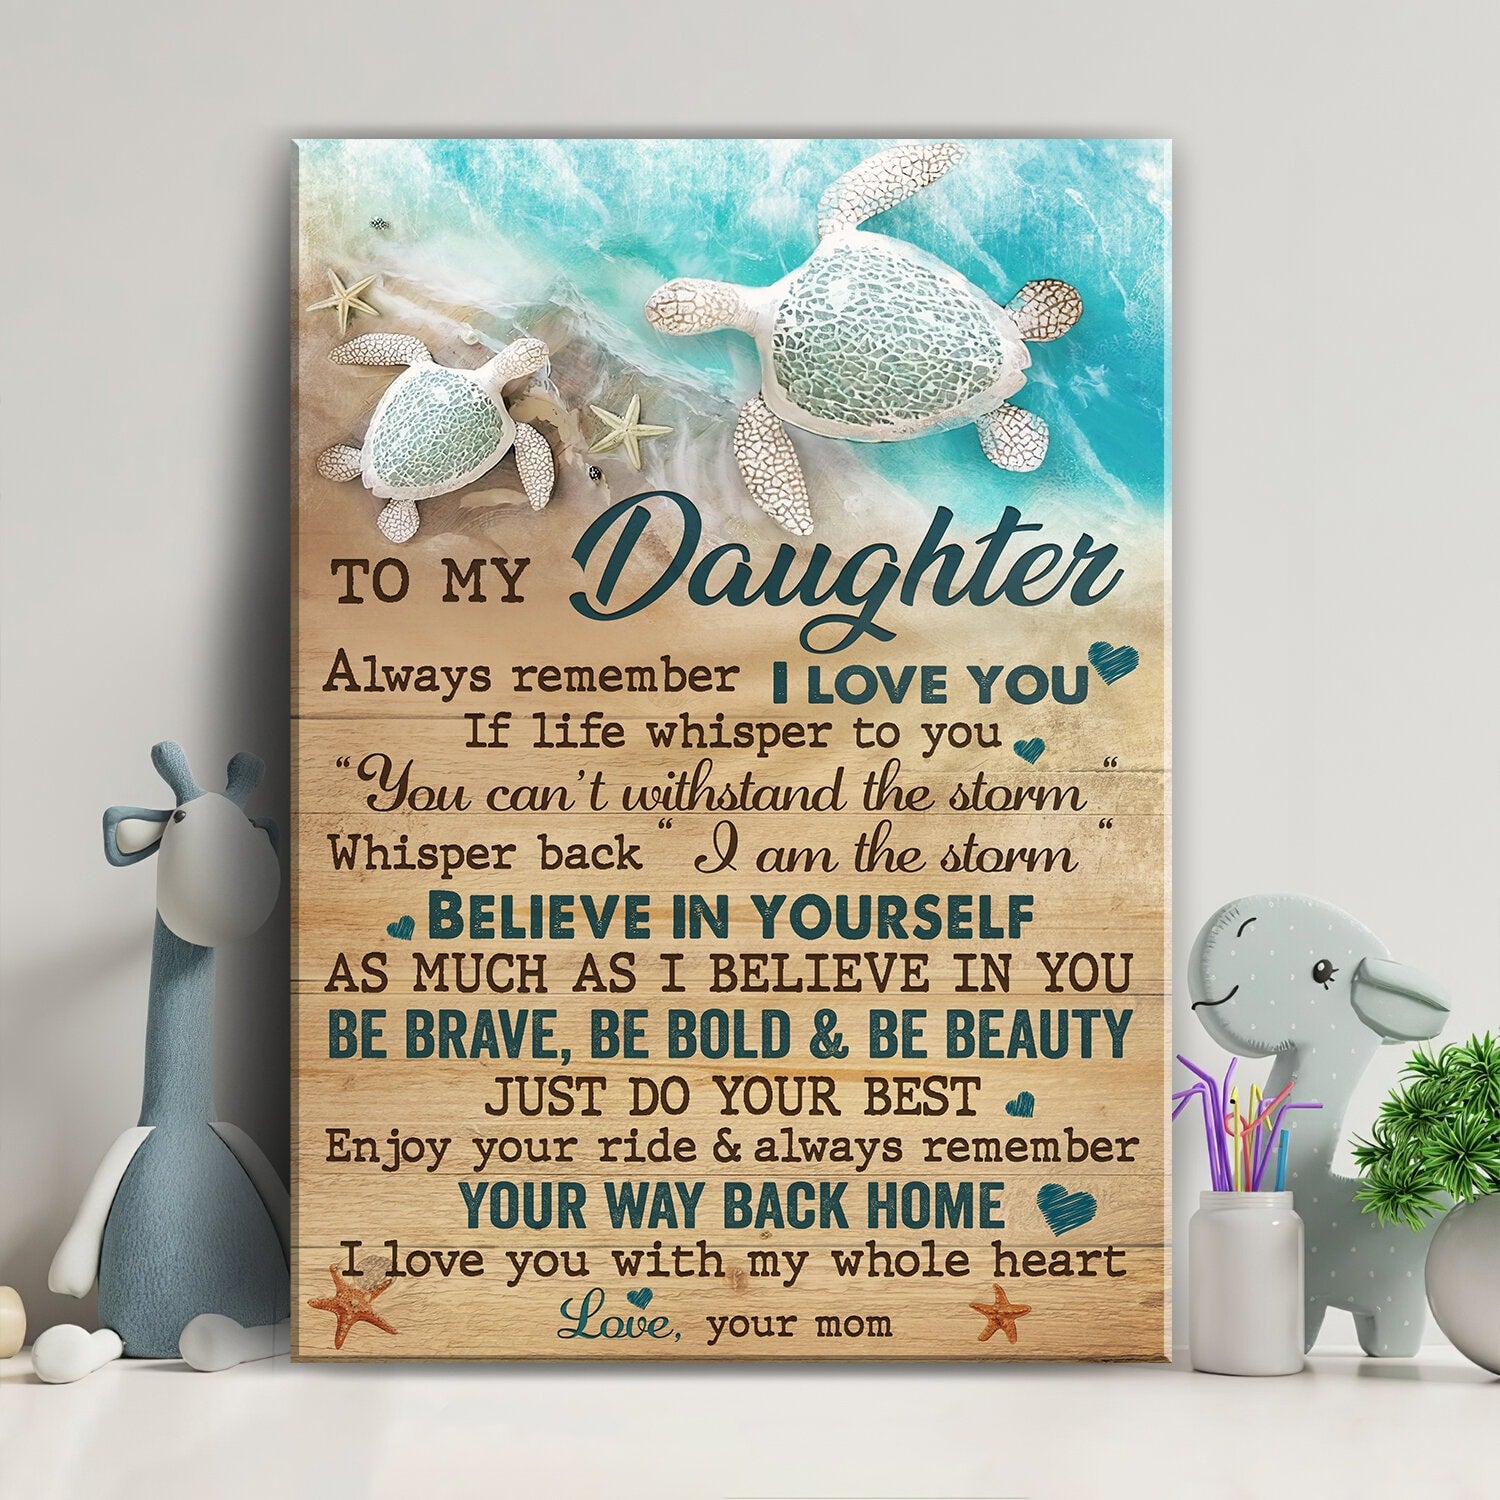 Mom to daughter, Sea turtle, Beach, Believe in your self - Family Portrait Canvas Prints, Wall Art